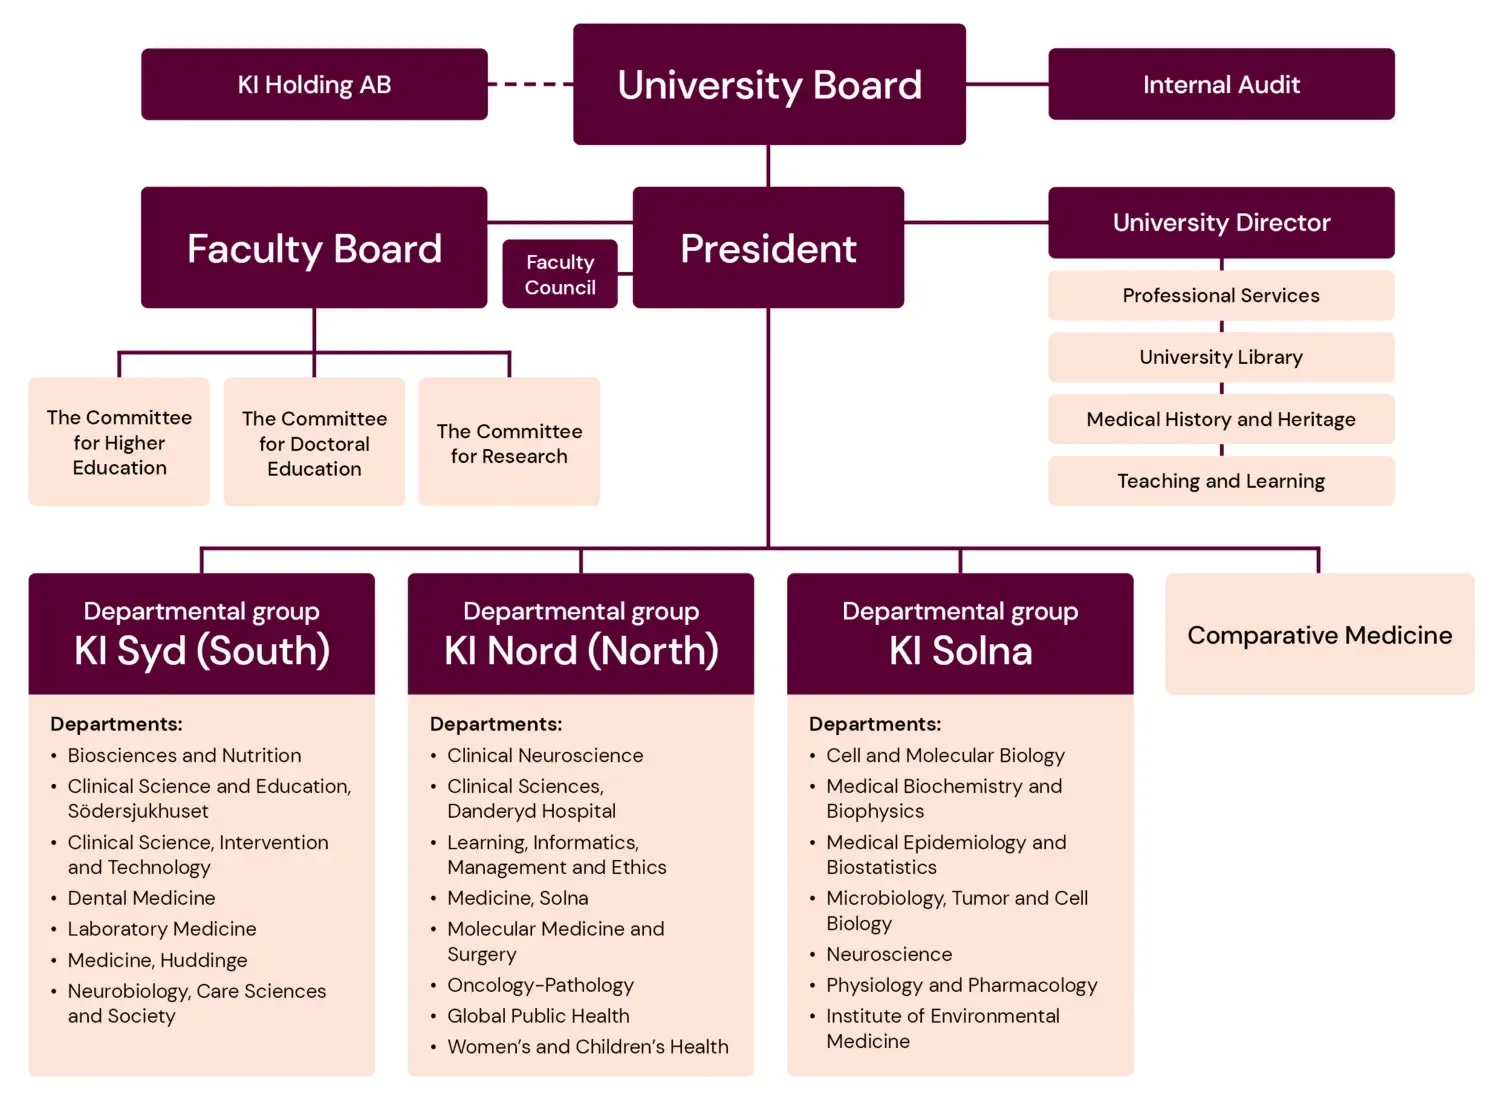 An organisational chart depicting central bodies and officials that exis within KI.